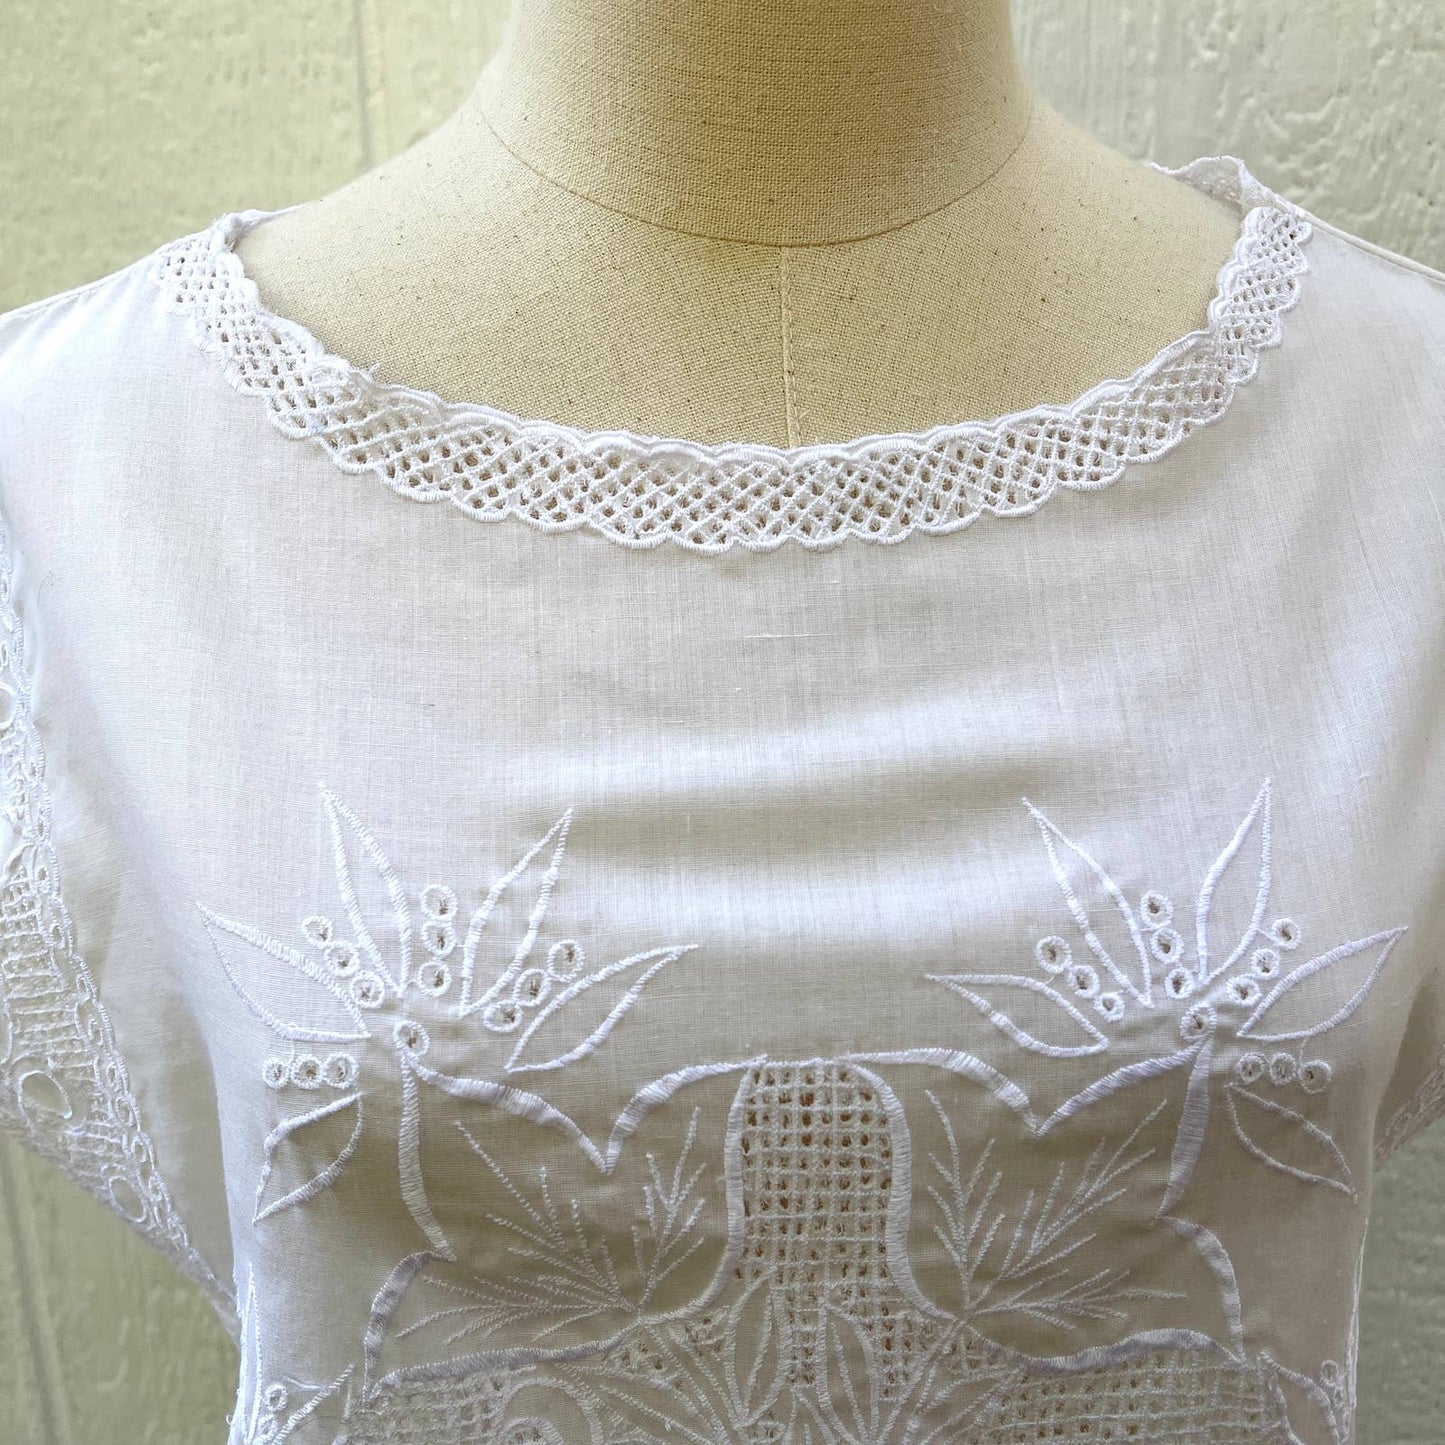 Vintage Handmade White Cotton Blouse Sleeveless Top Embroidered Open Stitch S M